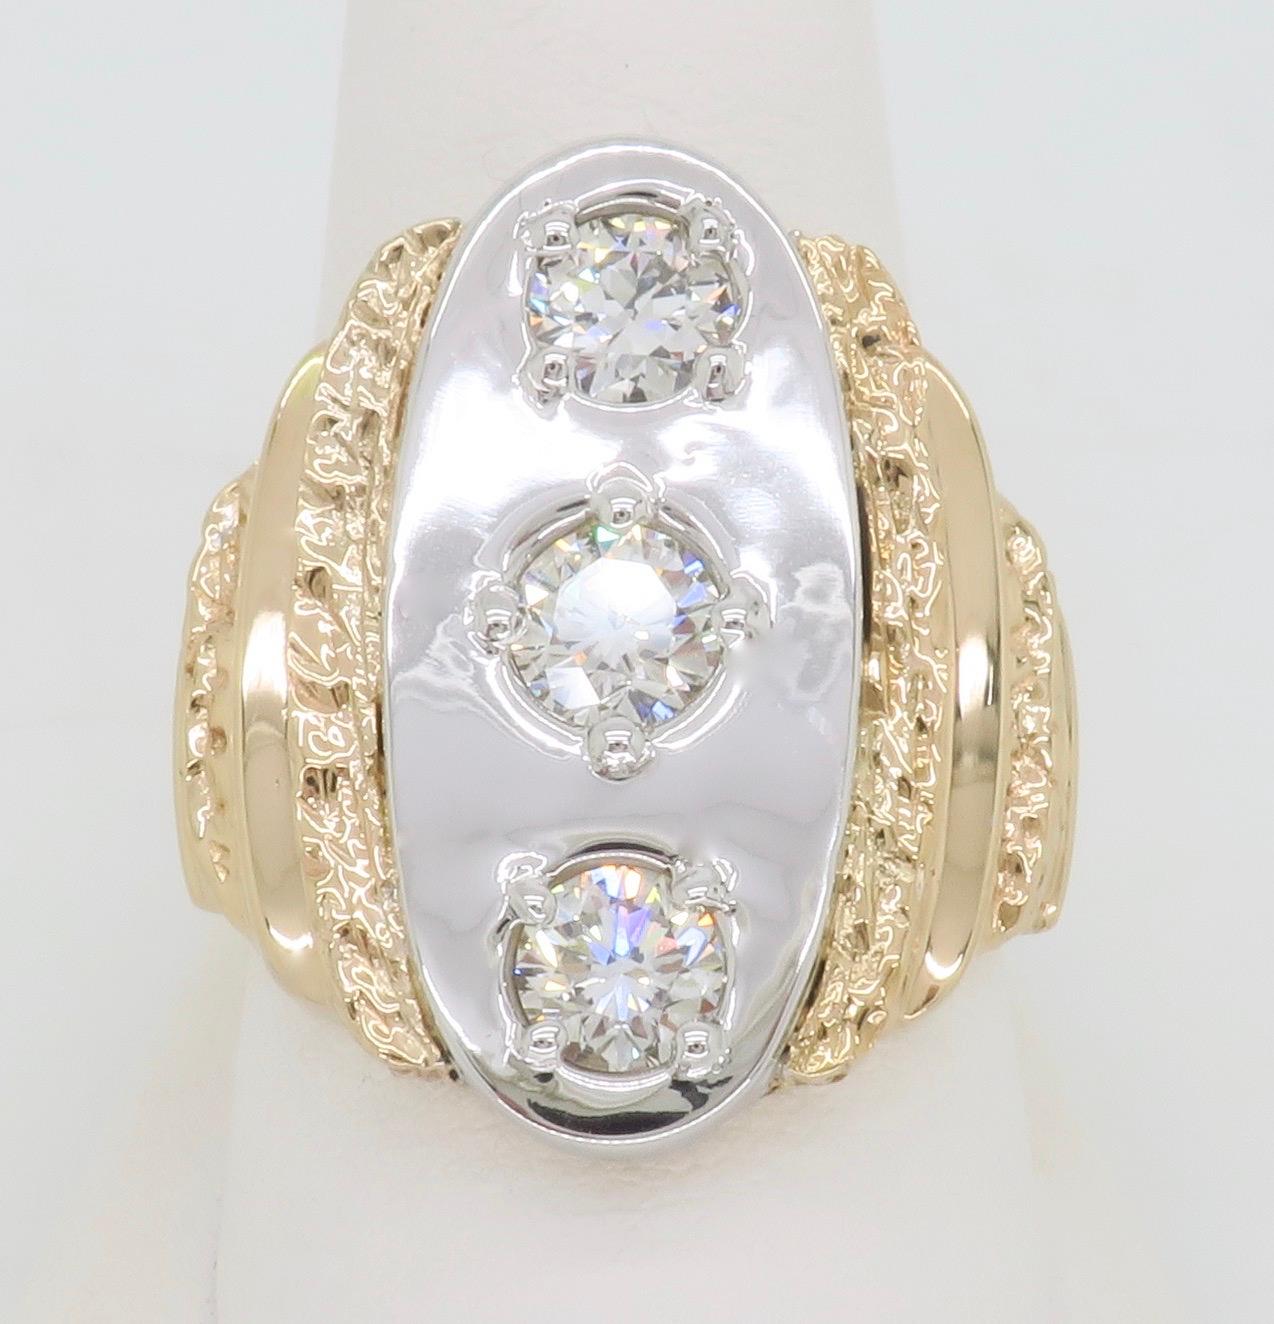 Custom made men's diamond ring made with 1.72ctw of Diamonds. 

Diamond Specifics: 
.64ct I VS2
.53ct H VS2
.55ct I VS2
Diamond Cut: Round Cut Diamonds
Total Diamond Carat Weight: Approximately 1.72CTW
Metal: 14K White & Yellow Gold
Ring Size: